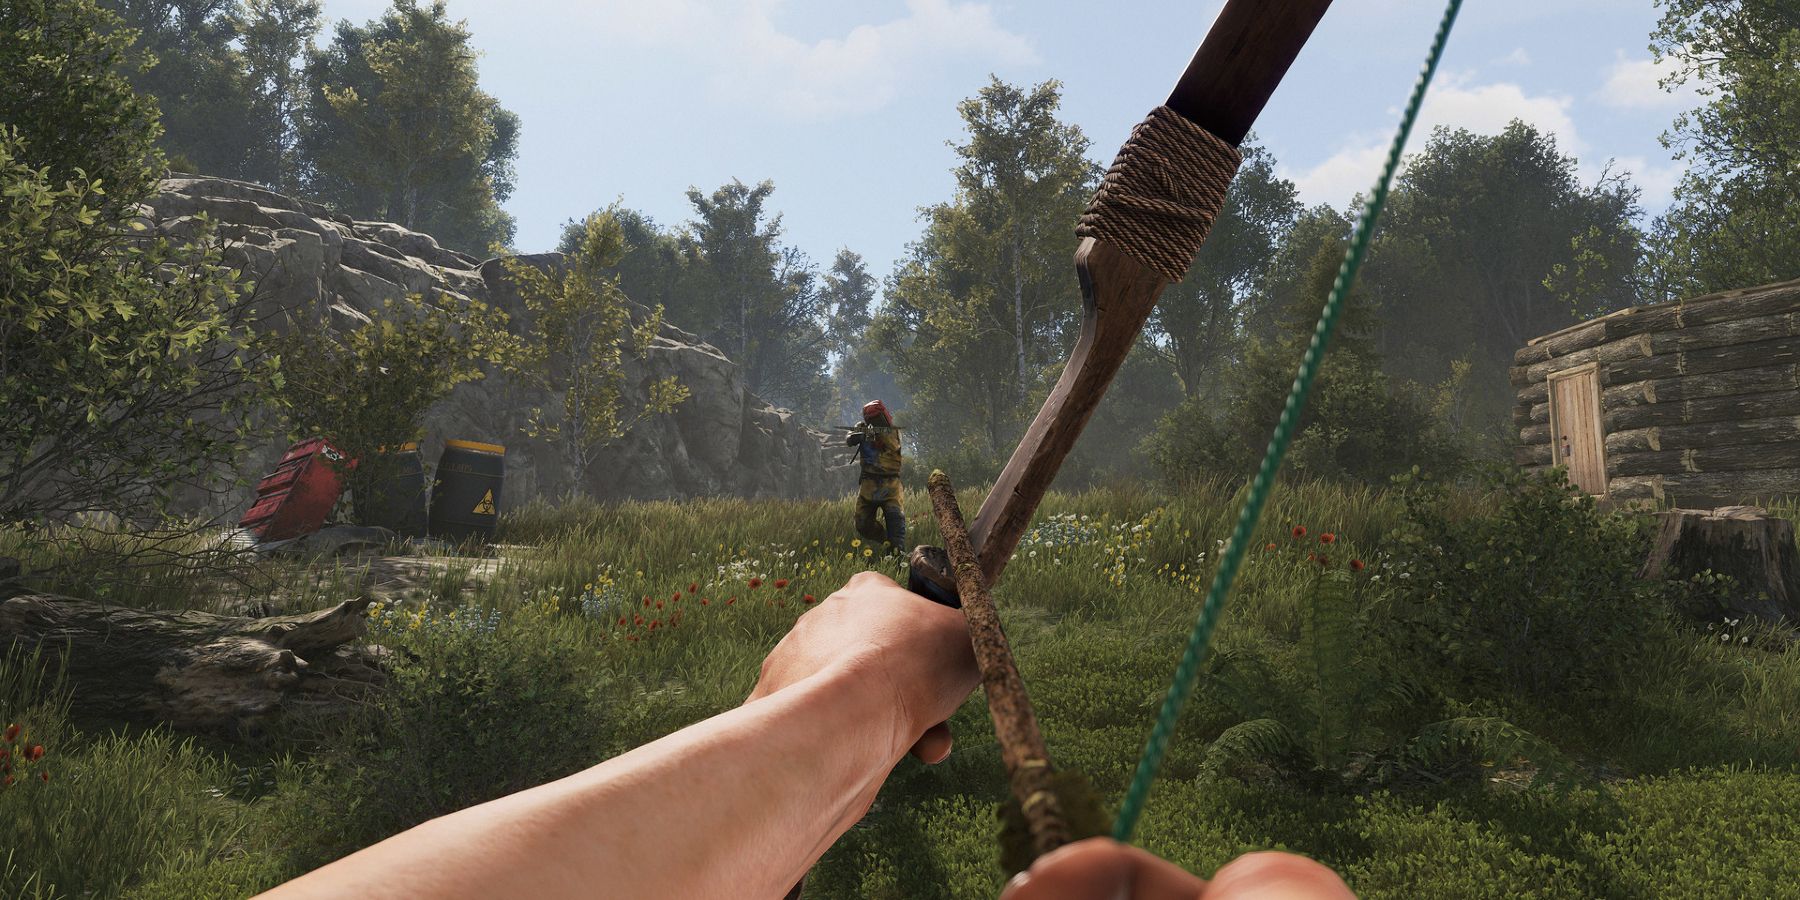 Screenshot from Rust showing the player about to fire an arrow at another player.